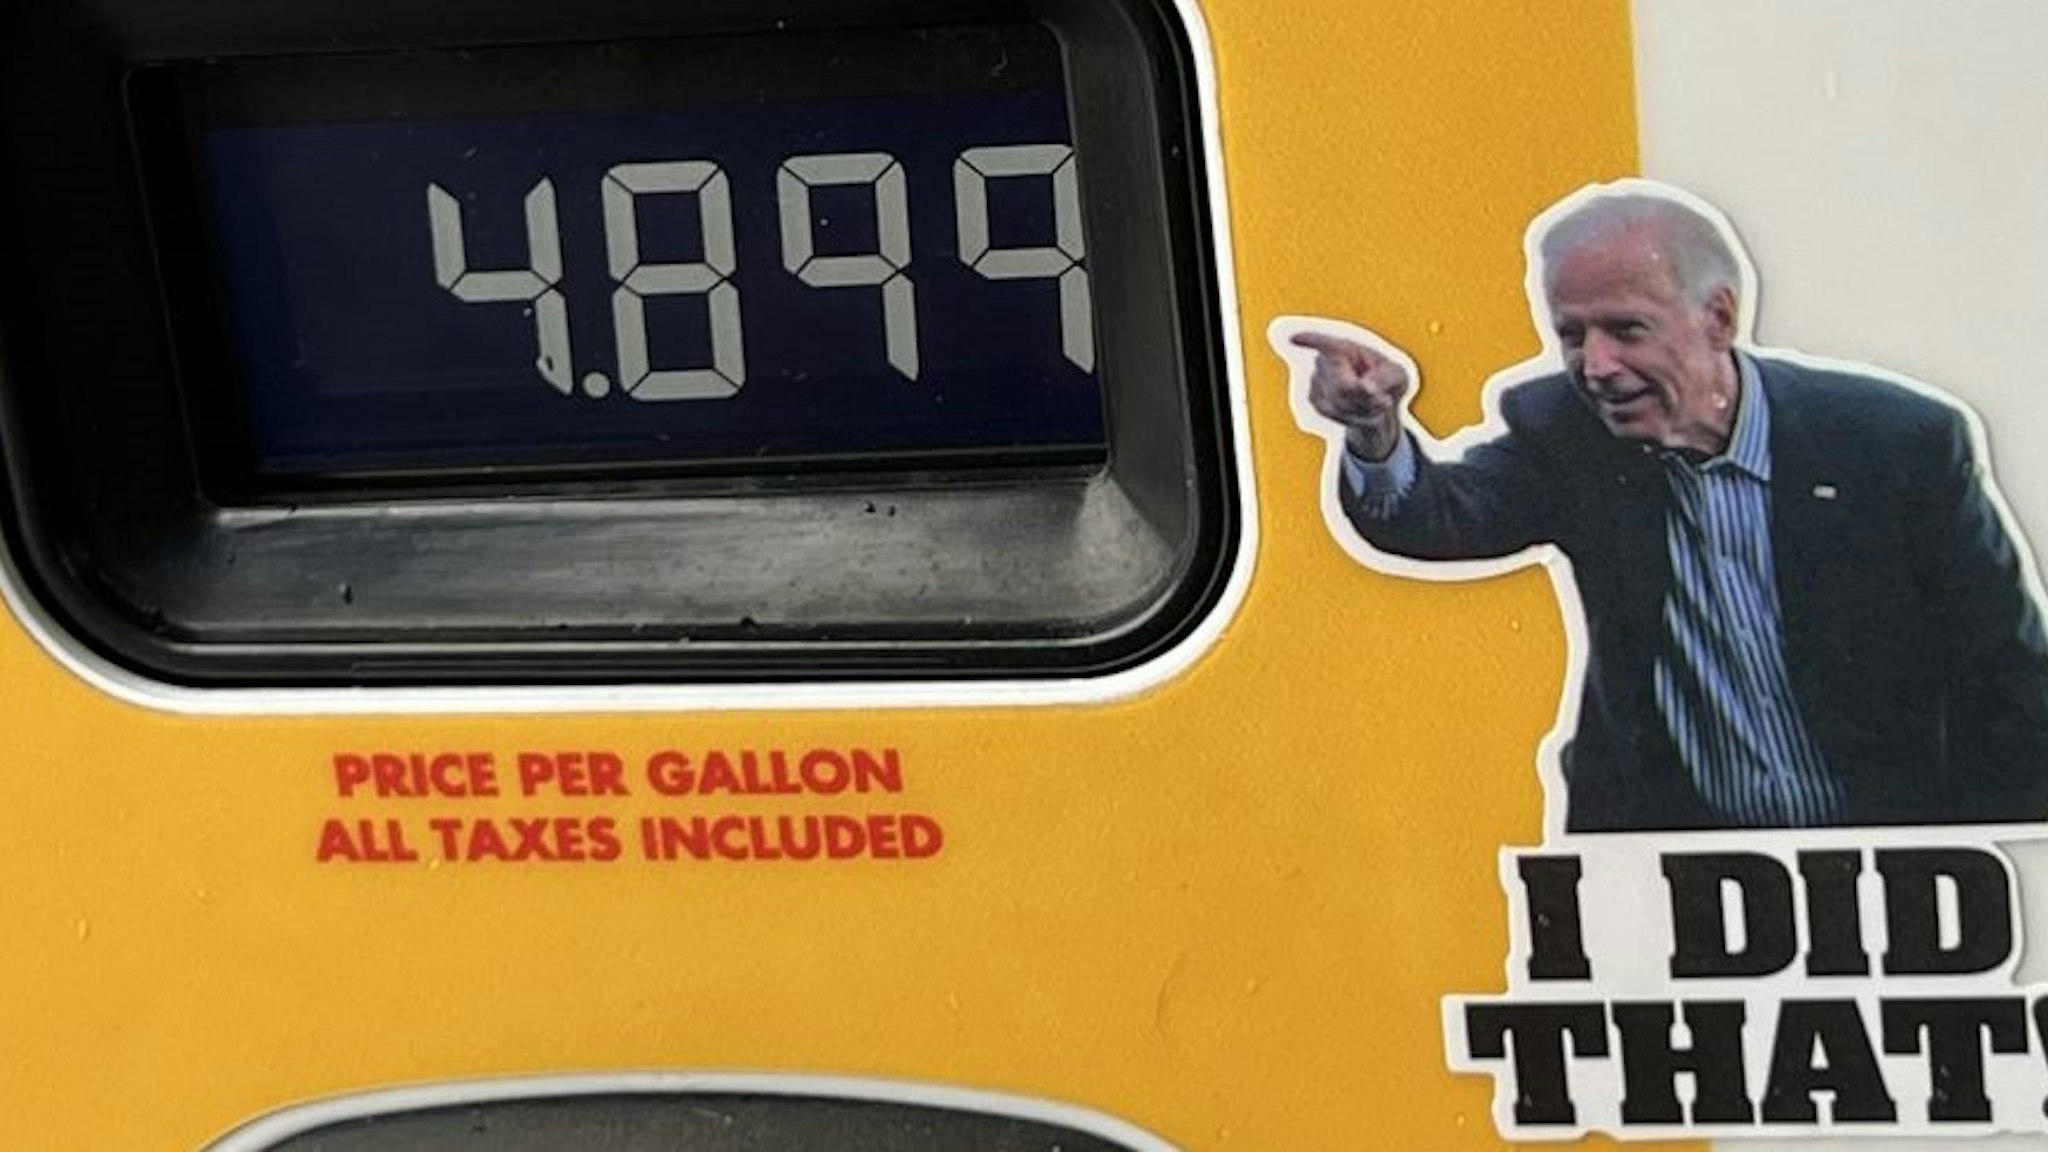 A satirical protest sticker critical of American President Joe Biden, with text reading I Did That, has been placed on a gasoline pump in Lafayette, California, likely to imply responsibility for high gasoline prices, December 29, 2021. (Photo by